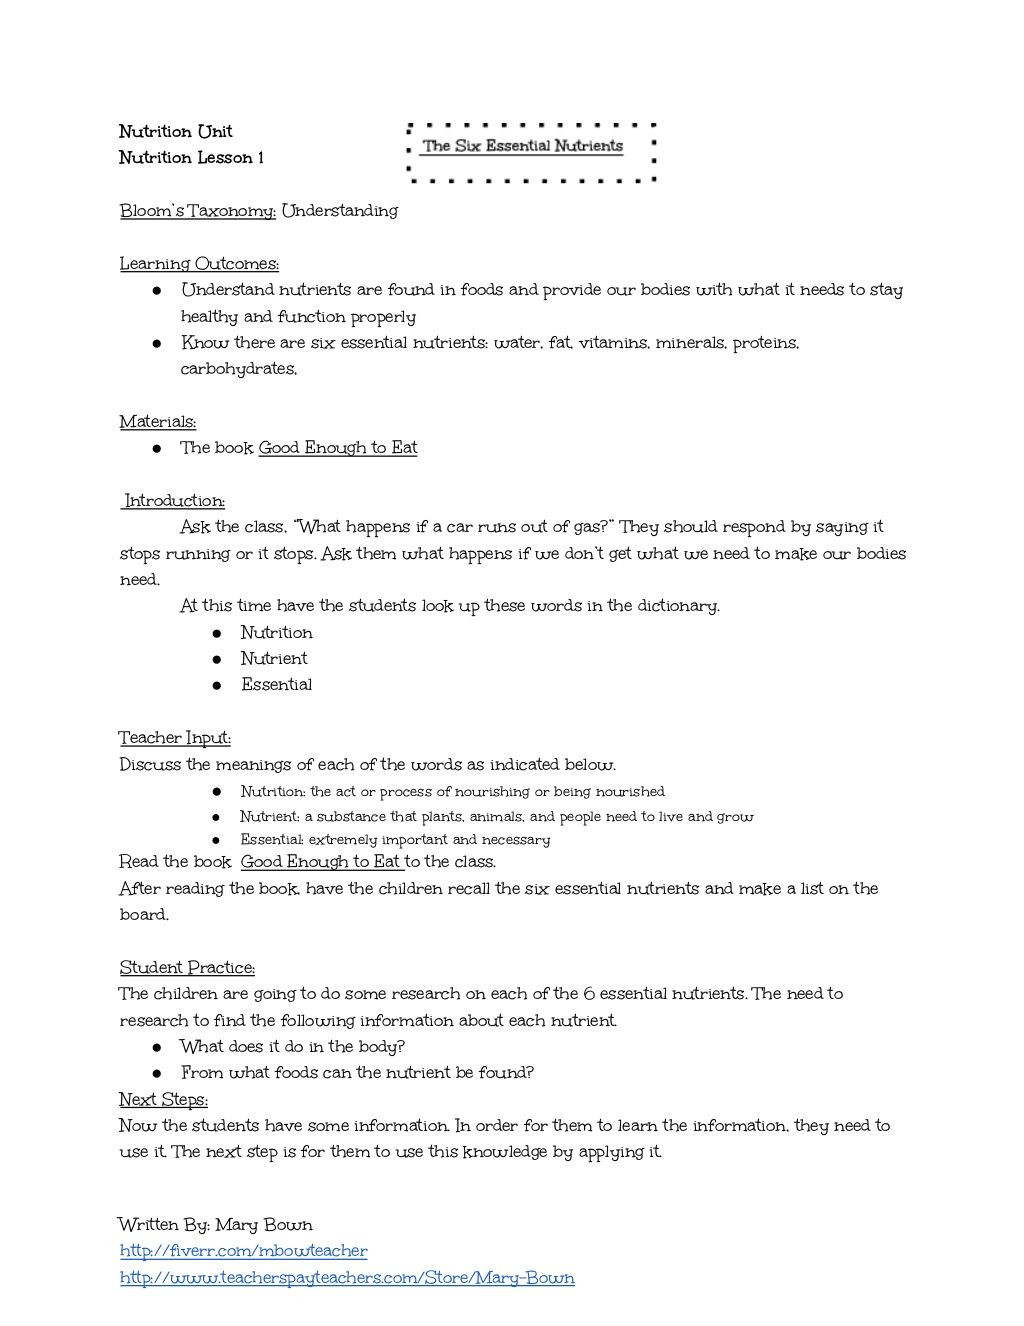 High School Health Lesson Plans the Six Essential Nutrients Lesson Plan and Worksheet by